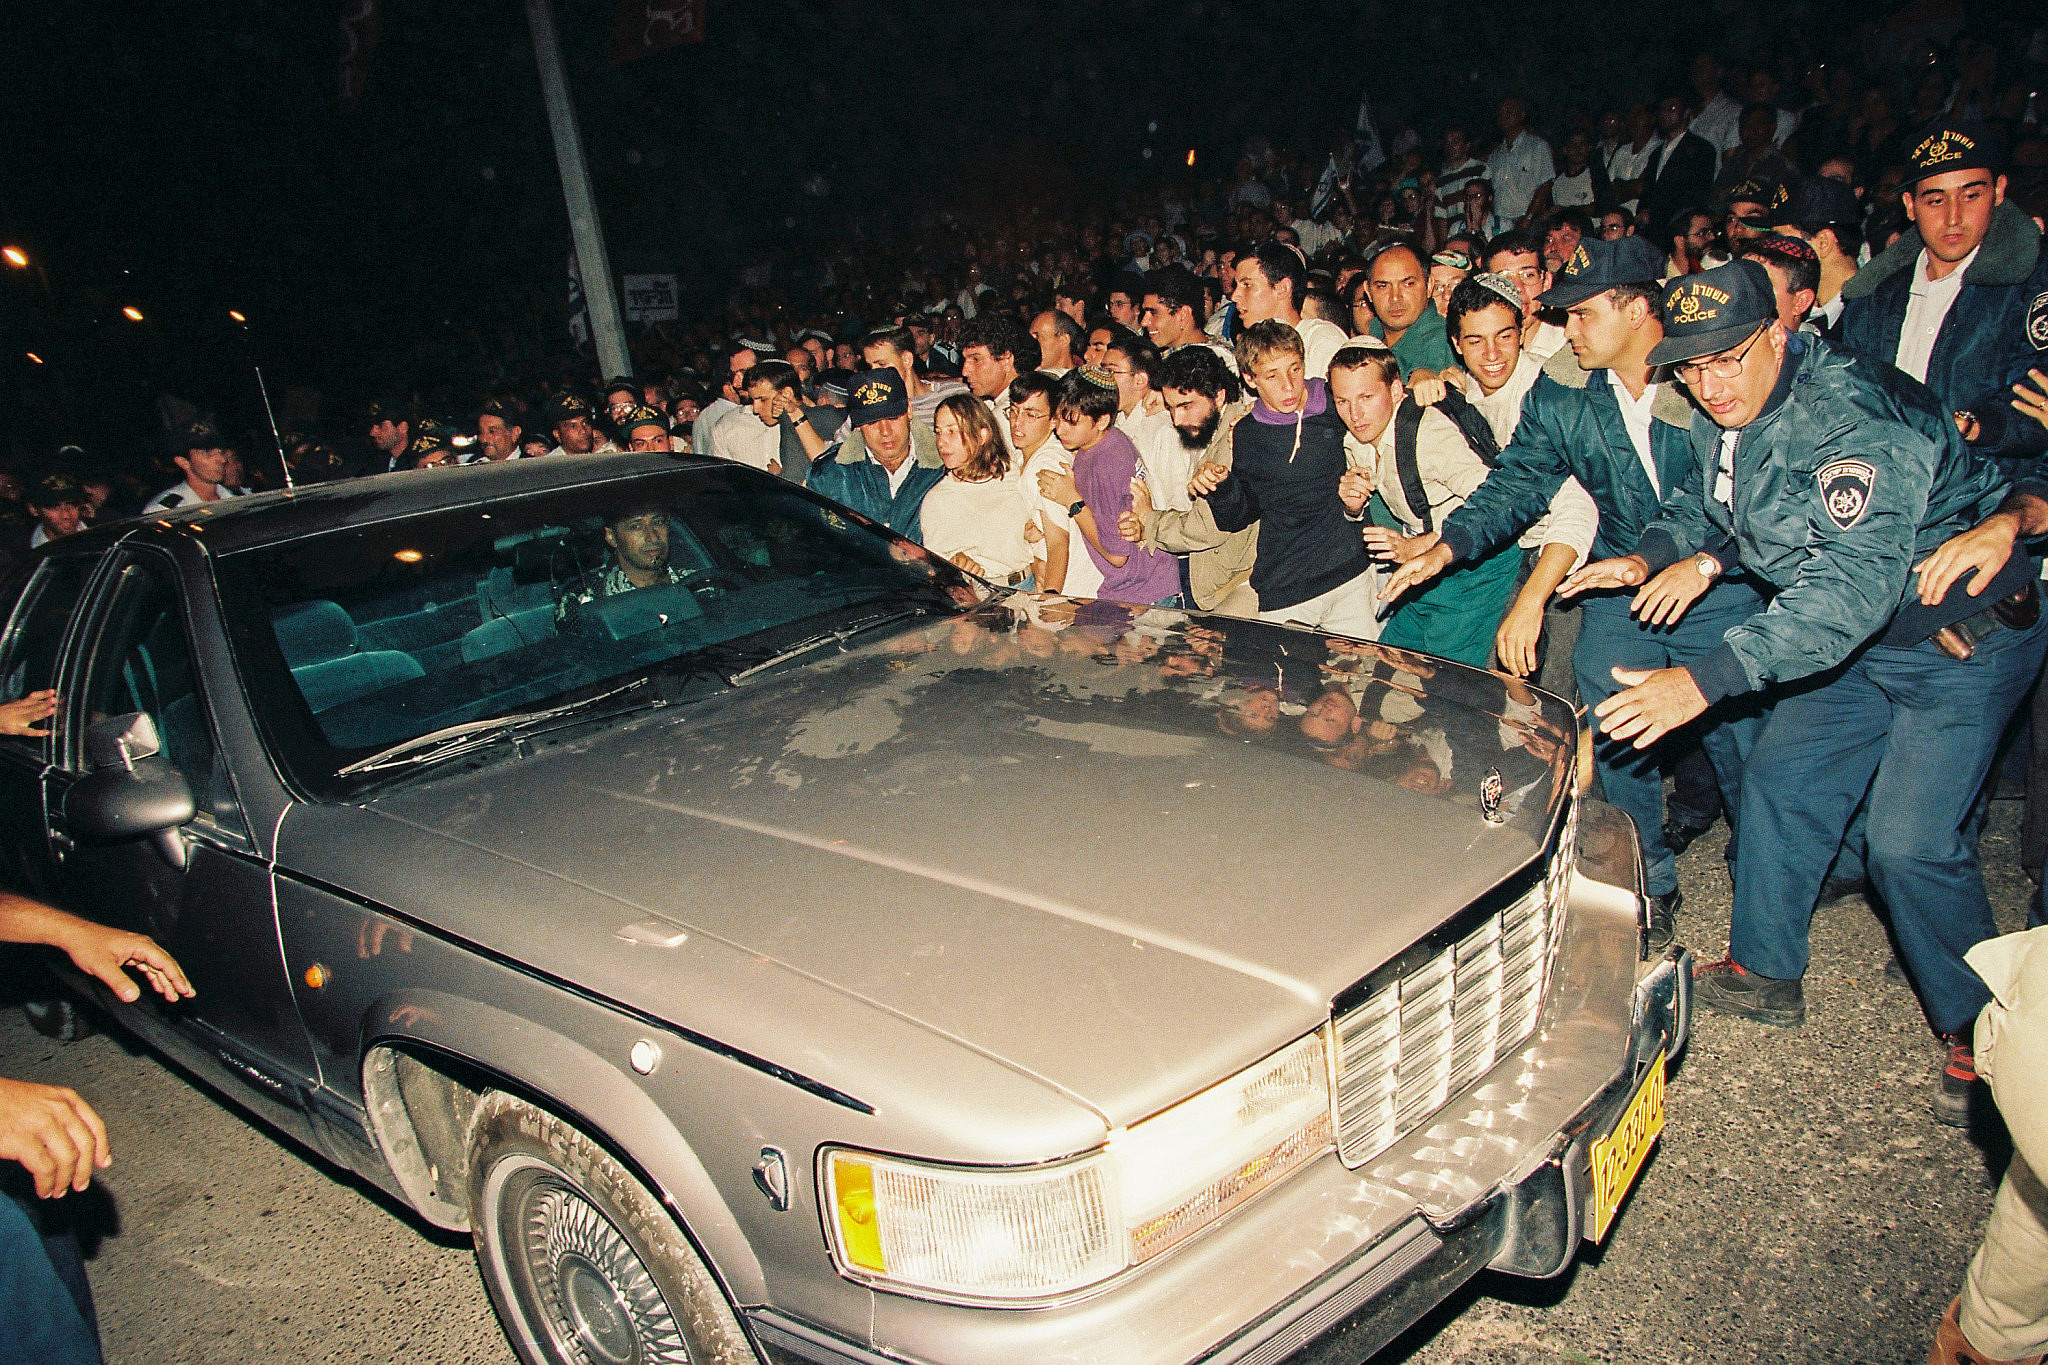 Israeli police try to prevent right-wing protesters demonstrating against the Oslo Accords from jumping on Israeli Prime Minister Yitzhak Rabin's car, Jerusalem, October 5, 1995. (Flash90)